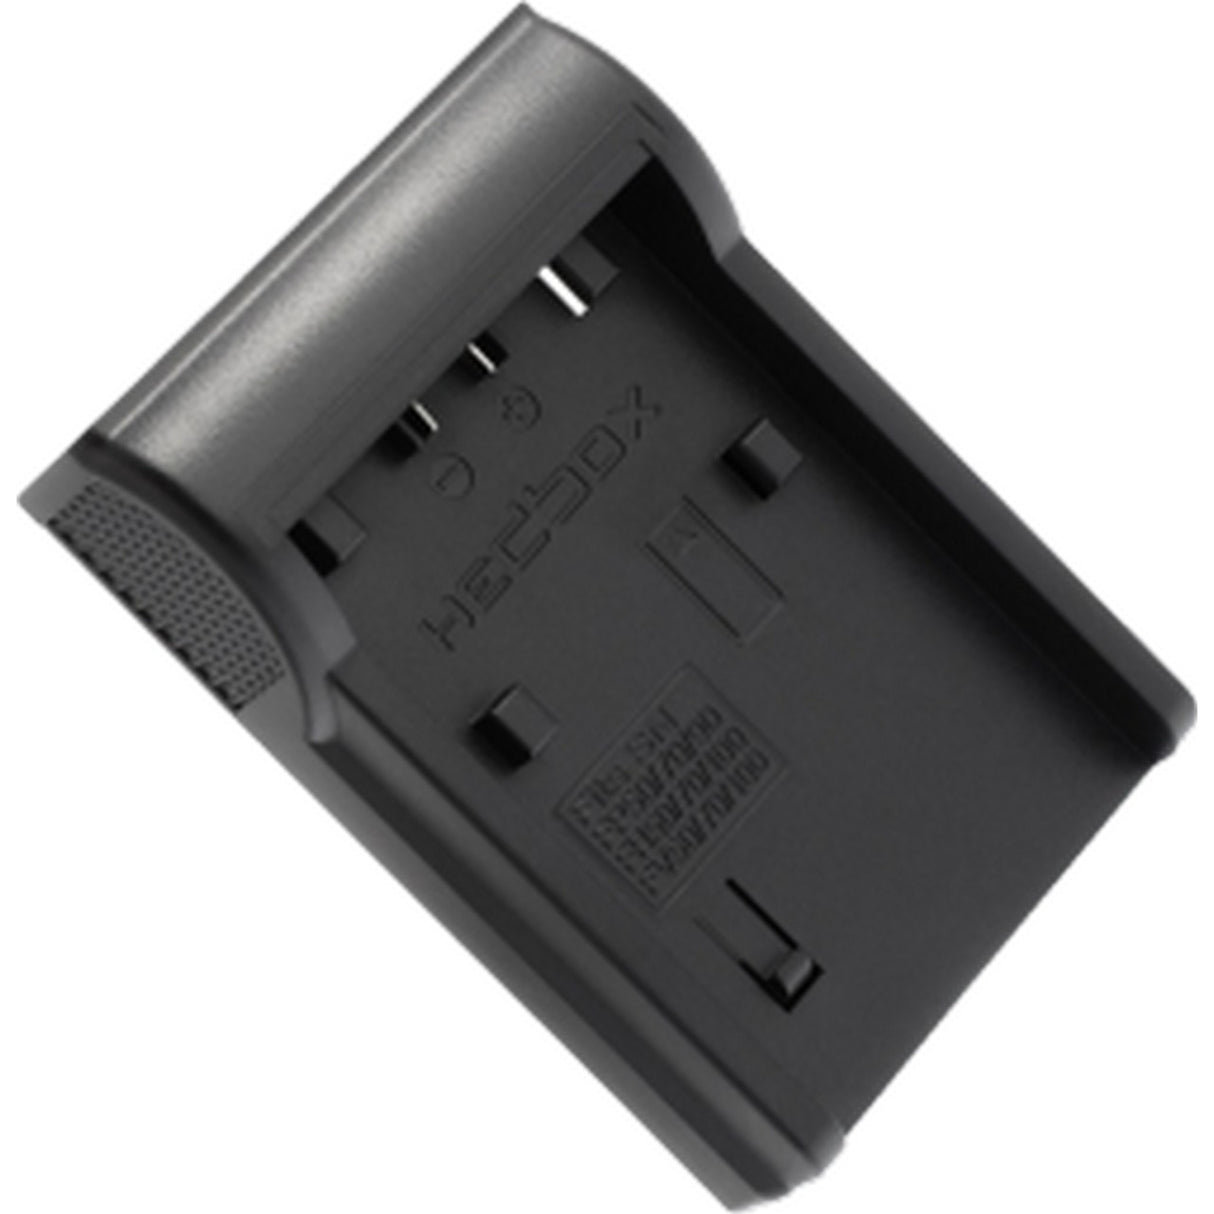 HEDBOX RP-DFP50 | Sony NP-Fh, FP, FV DV Charger Plate for RP-DC50, RP-DC40, RP-DC30